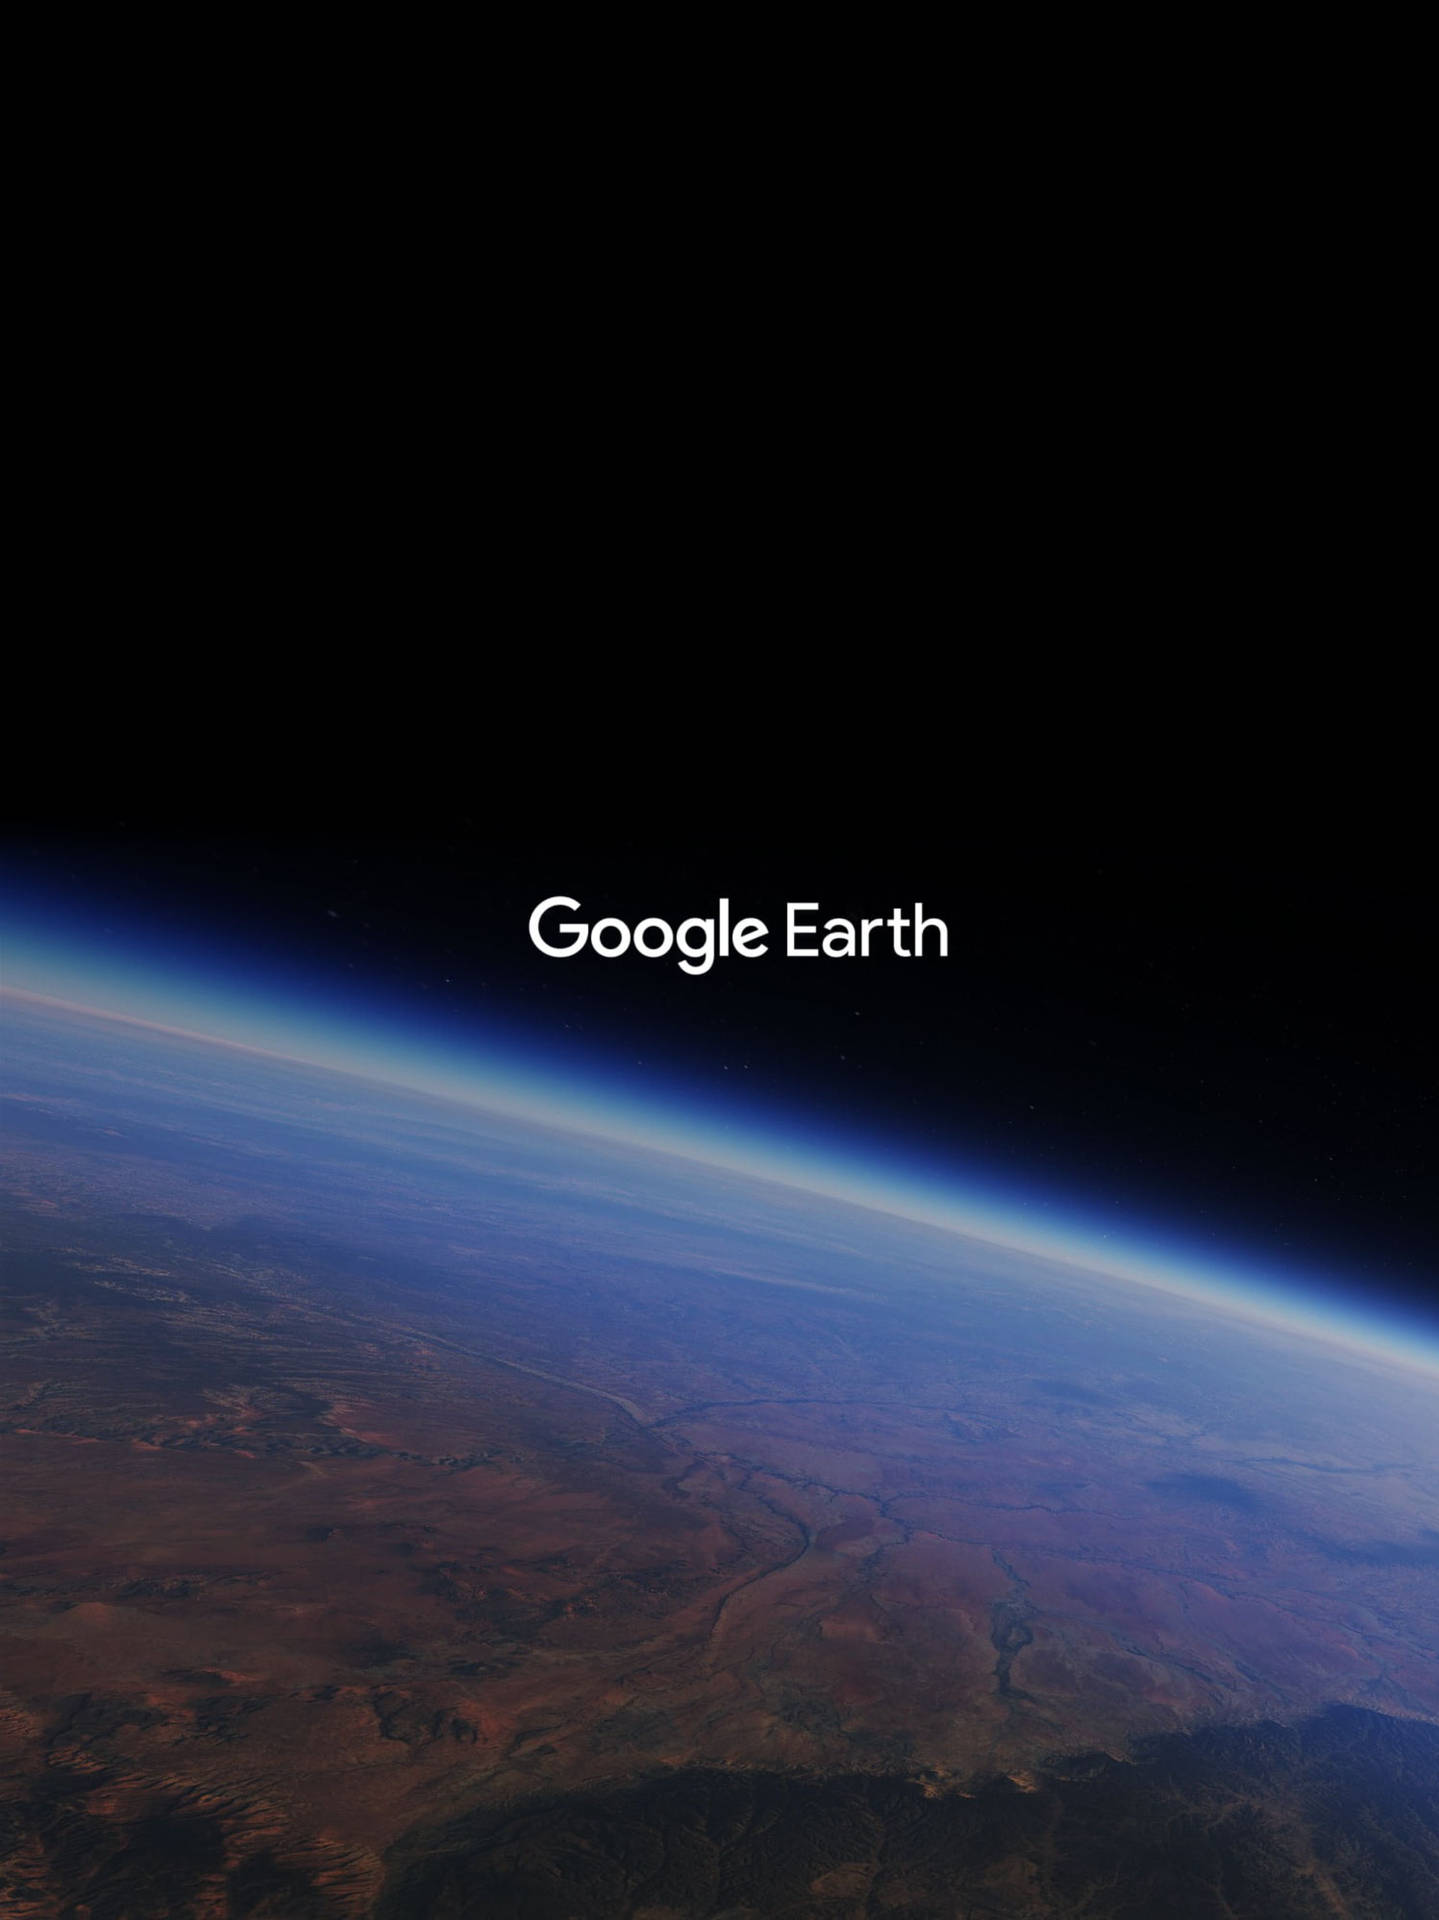 Google Earth In Outer Space